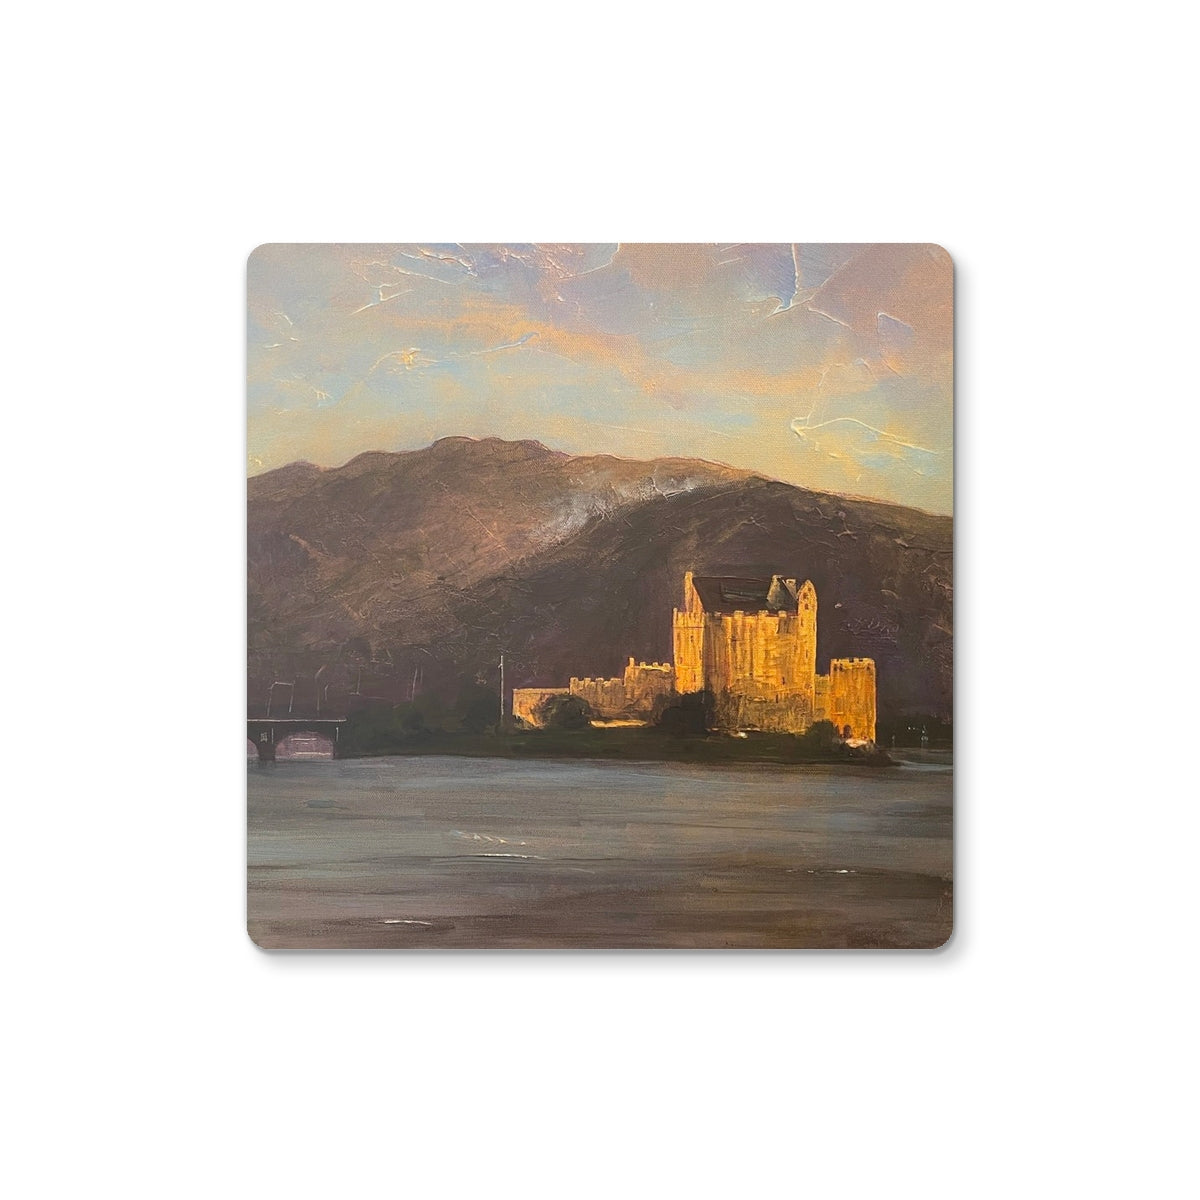 Eilean Donan Castle Art Gifts Coaster-Coasters-Historic & Iconic Scotland Art Gallery-4 Coasters-Paintings, Prints, Homeware, Art Gifts From Scotland By Scottish Artist Kevin Hunter